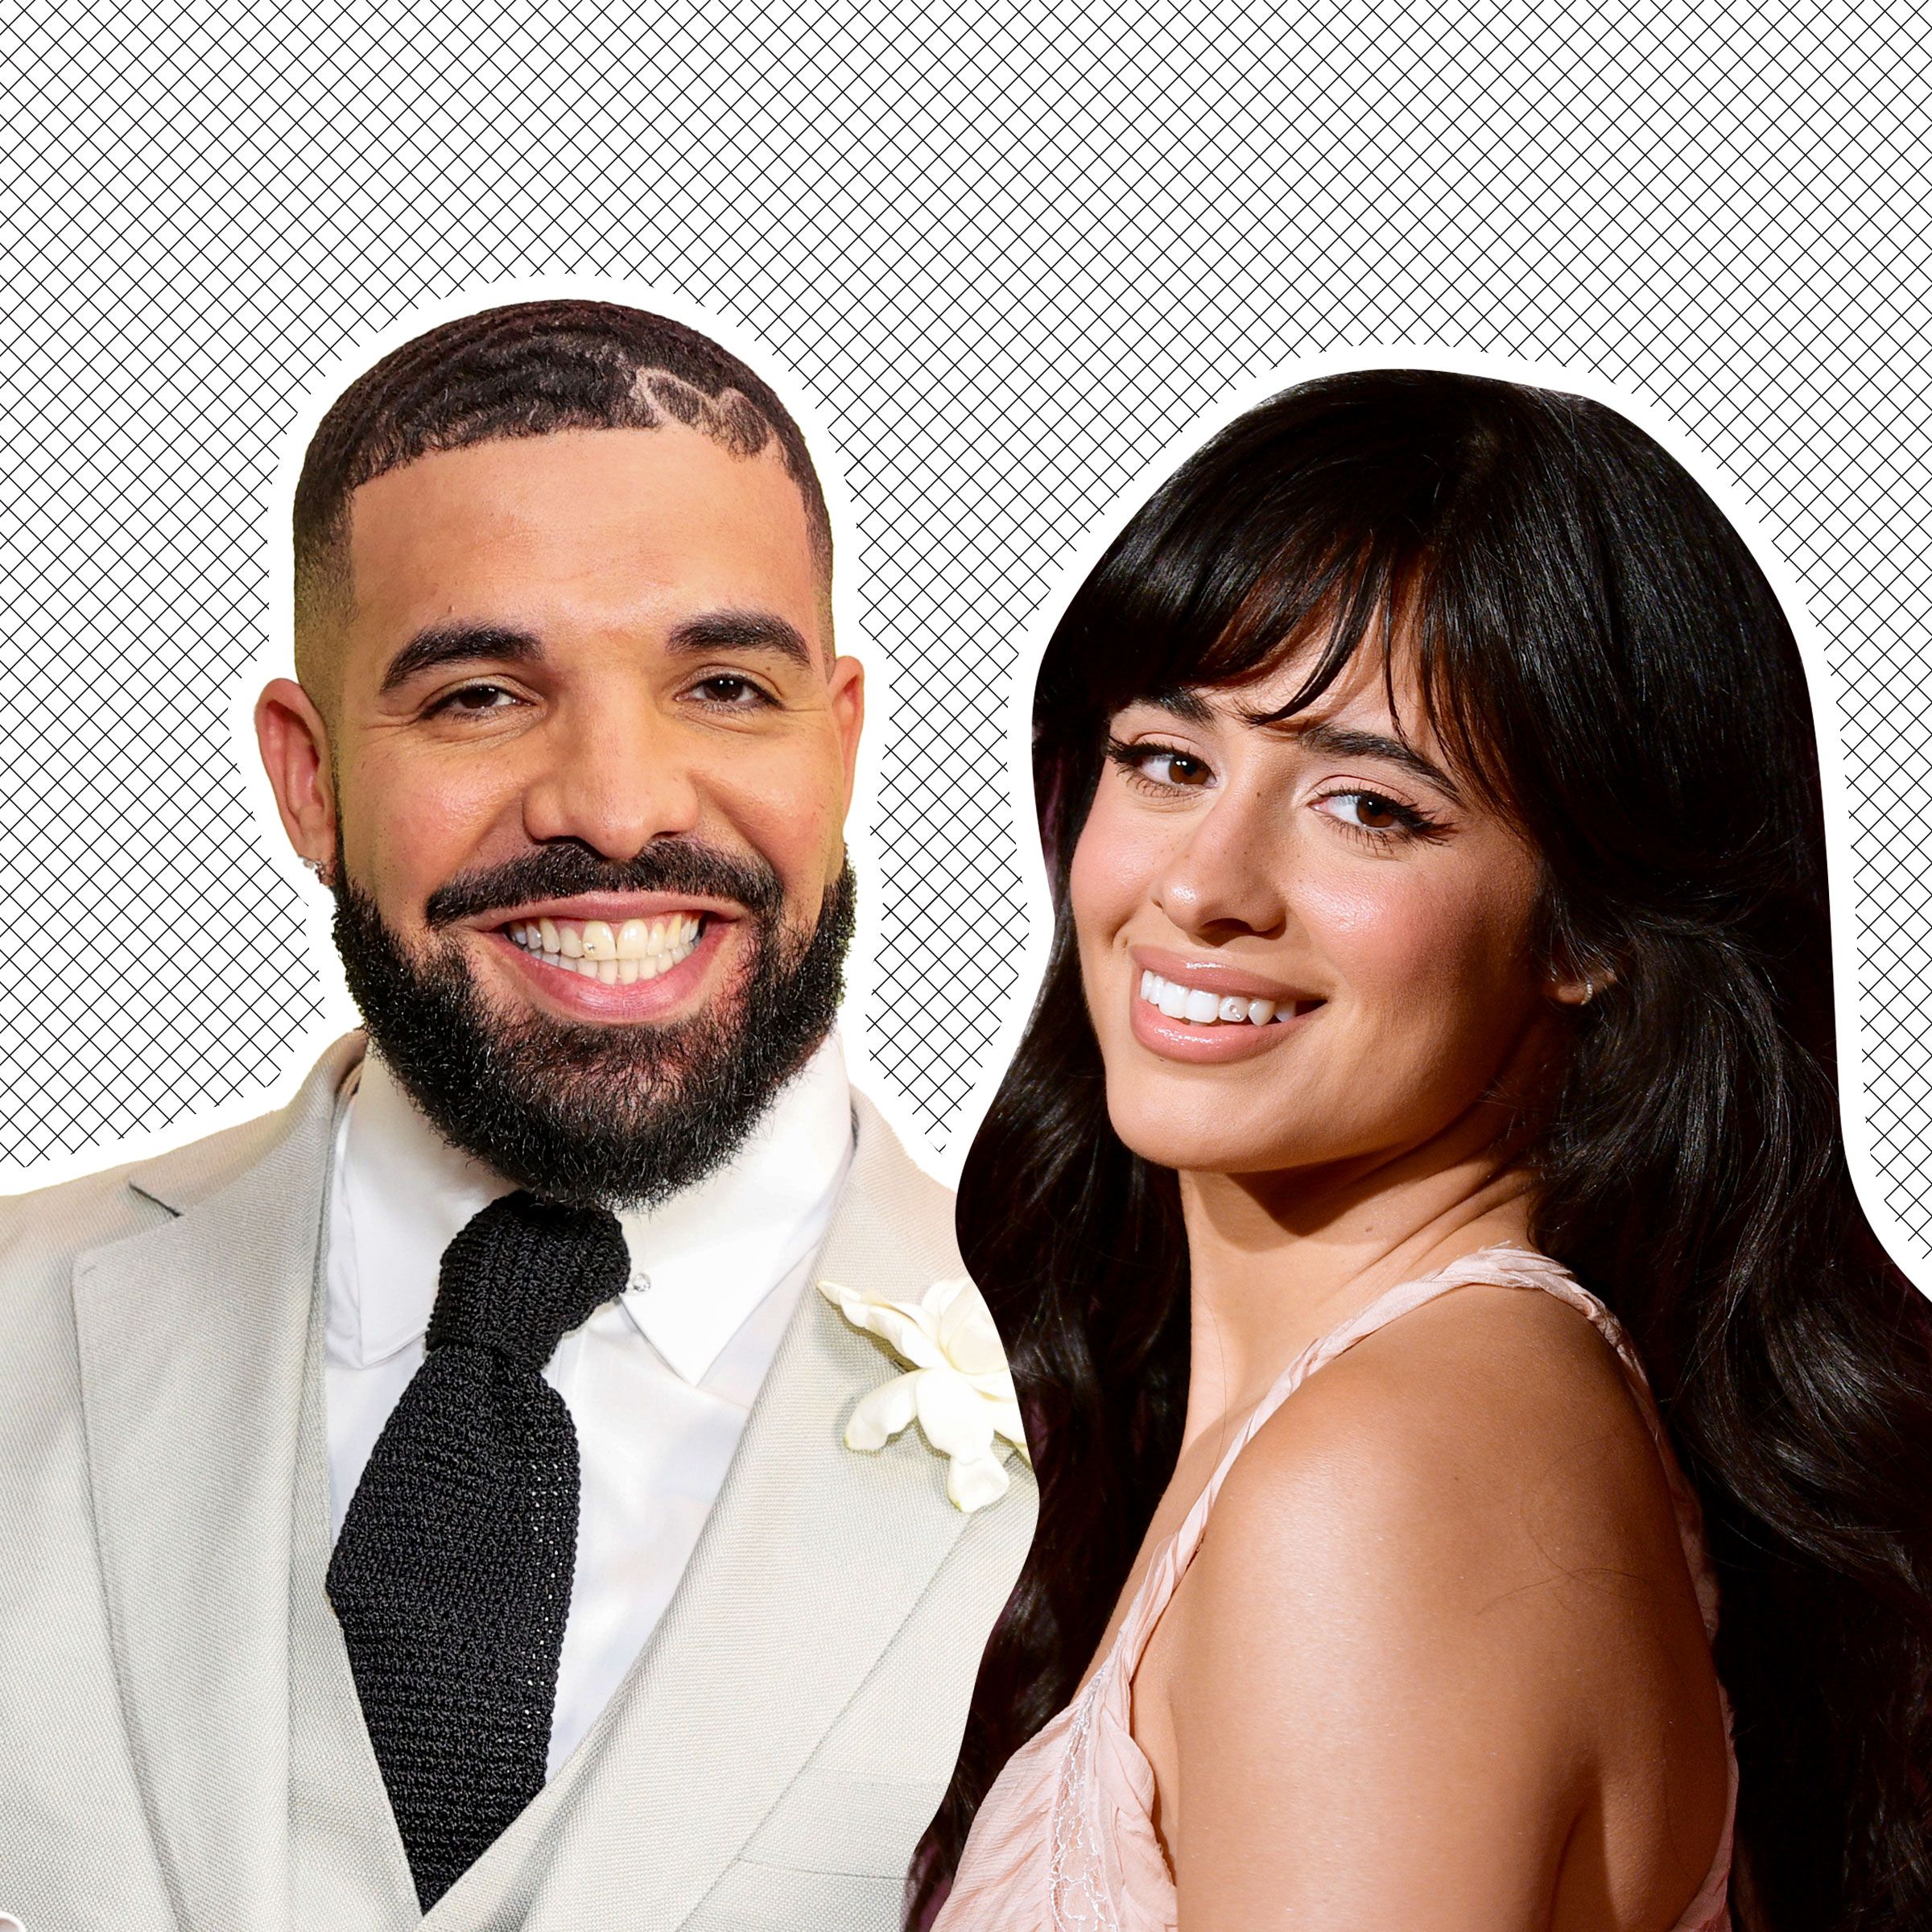 Drake and Camila Cabello Are Riding Jet Skis Together